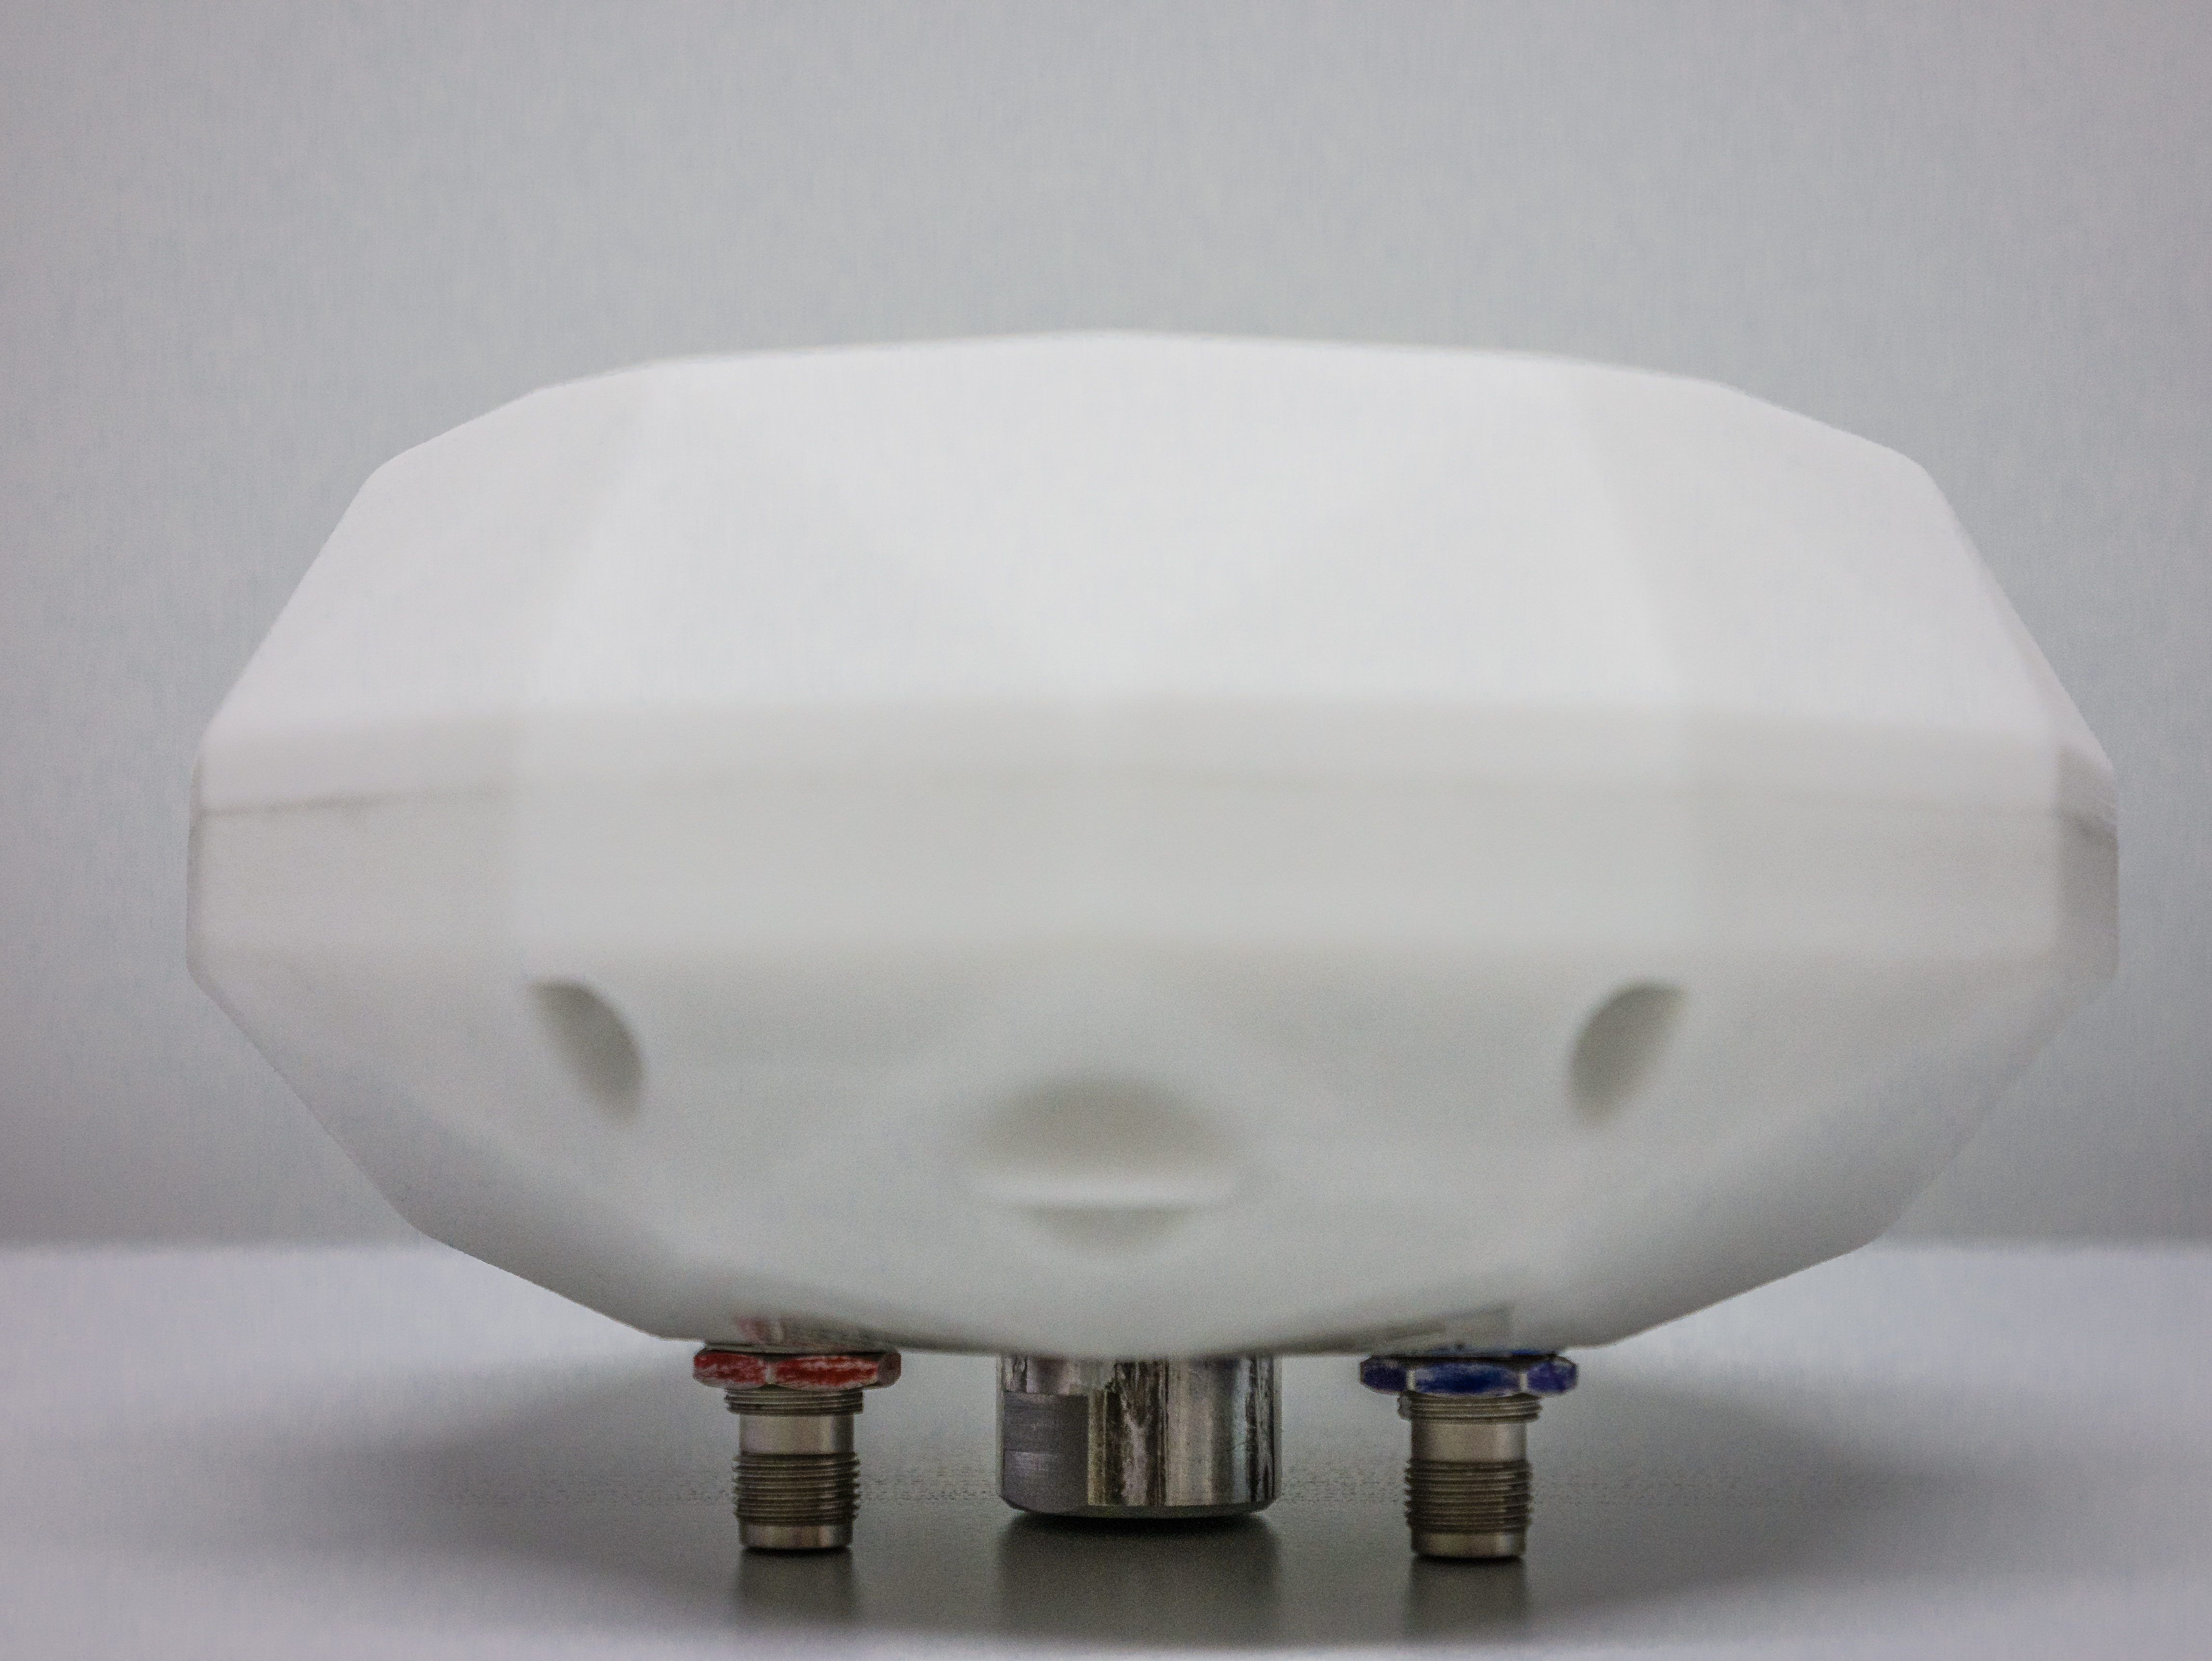 TeleOrbit's GNSSA-DCP (dual-circularly polarized (RHCP & LHCP)) antenna shown in its 3D-printed white housing.